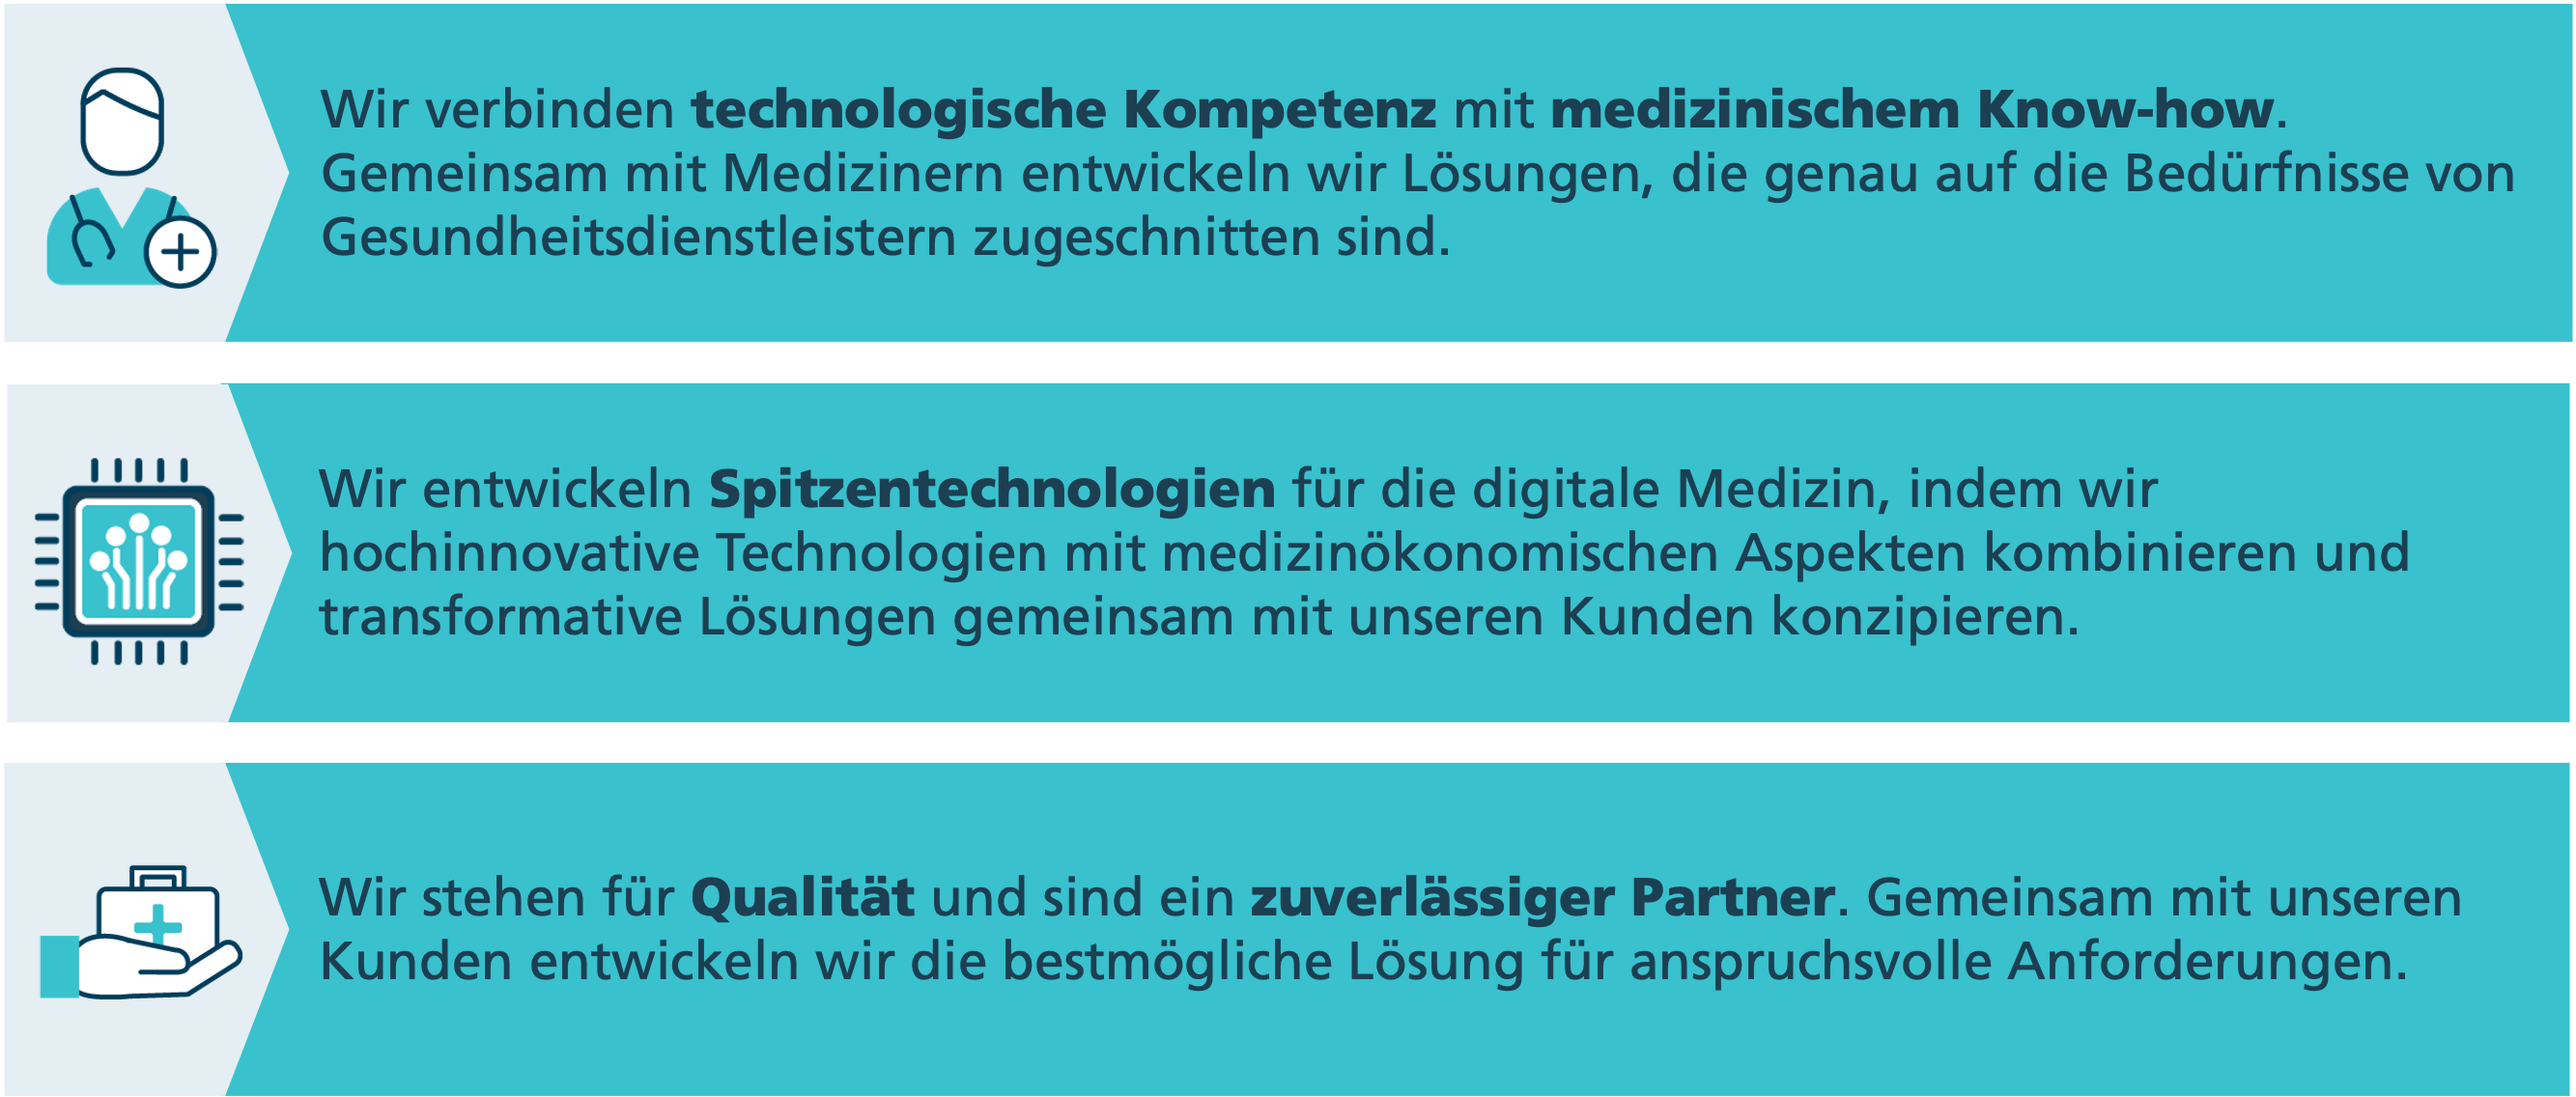 Digital Health Systems – Unsere Mission